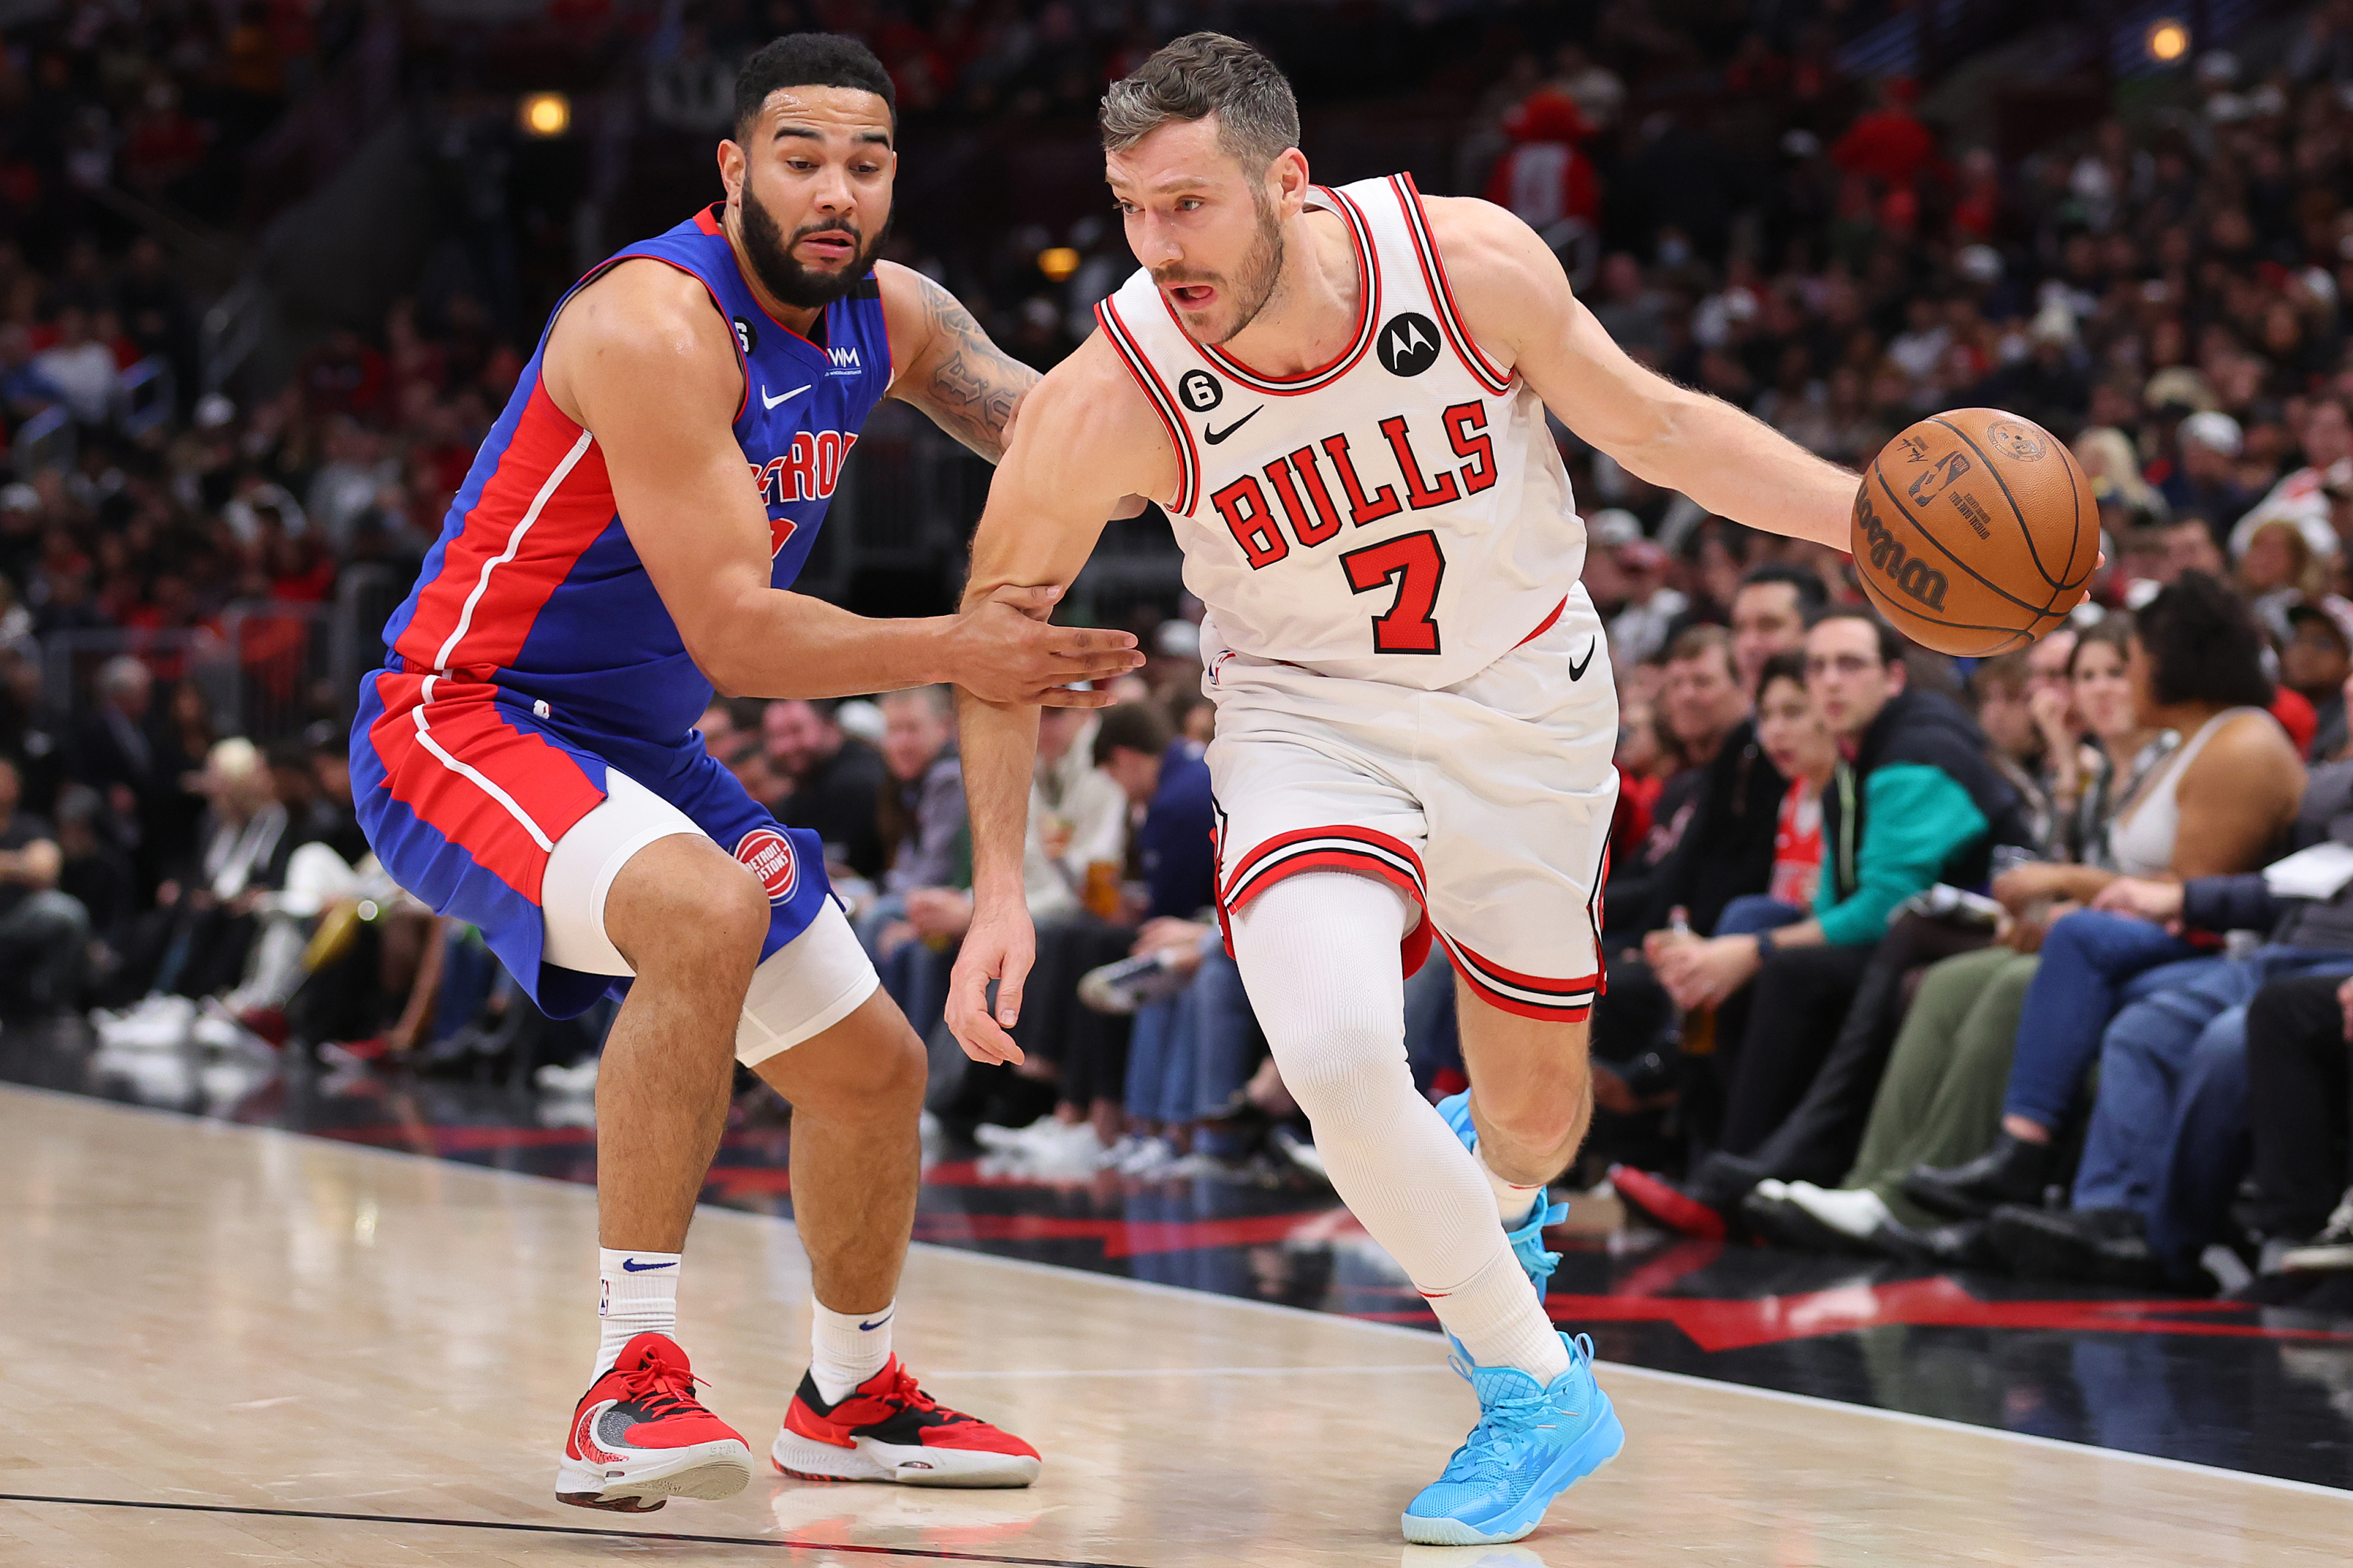 Chicago Bulls could make history tonight in big game against Pistons